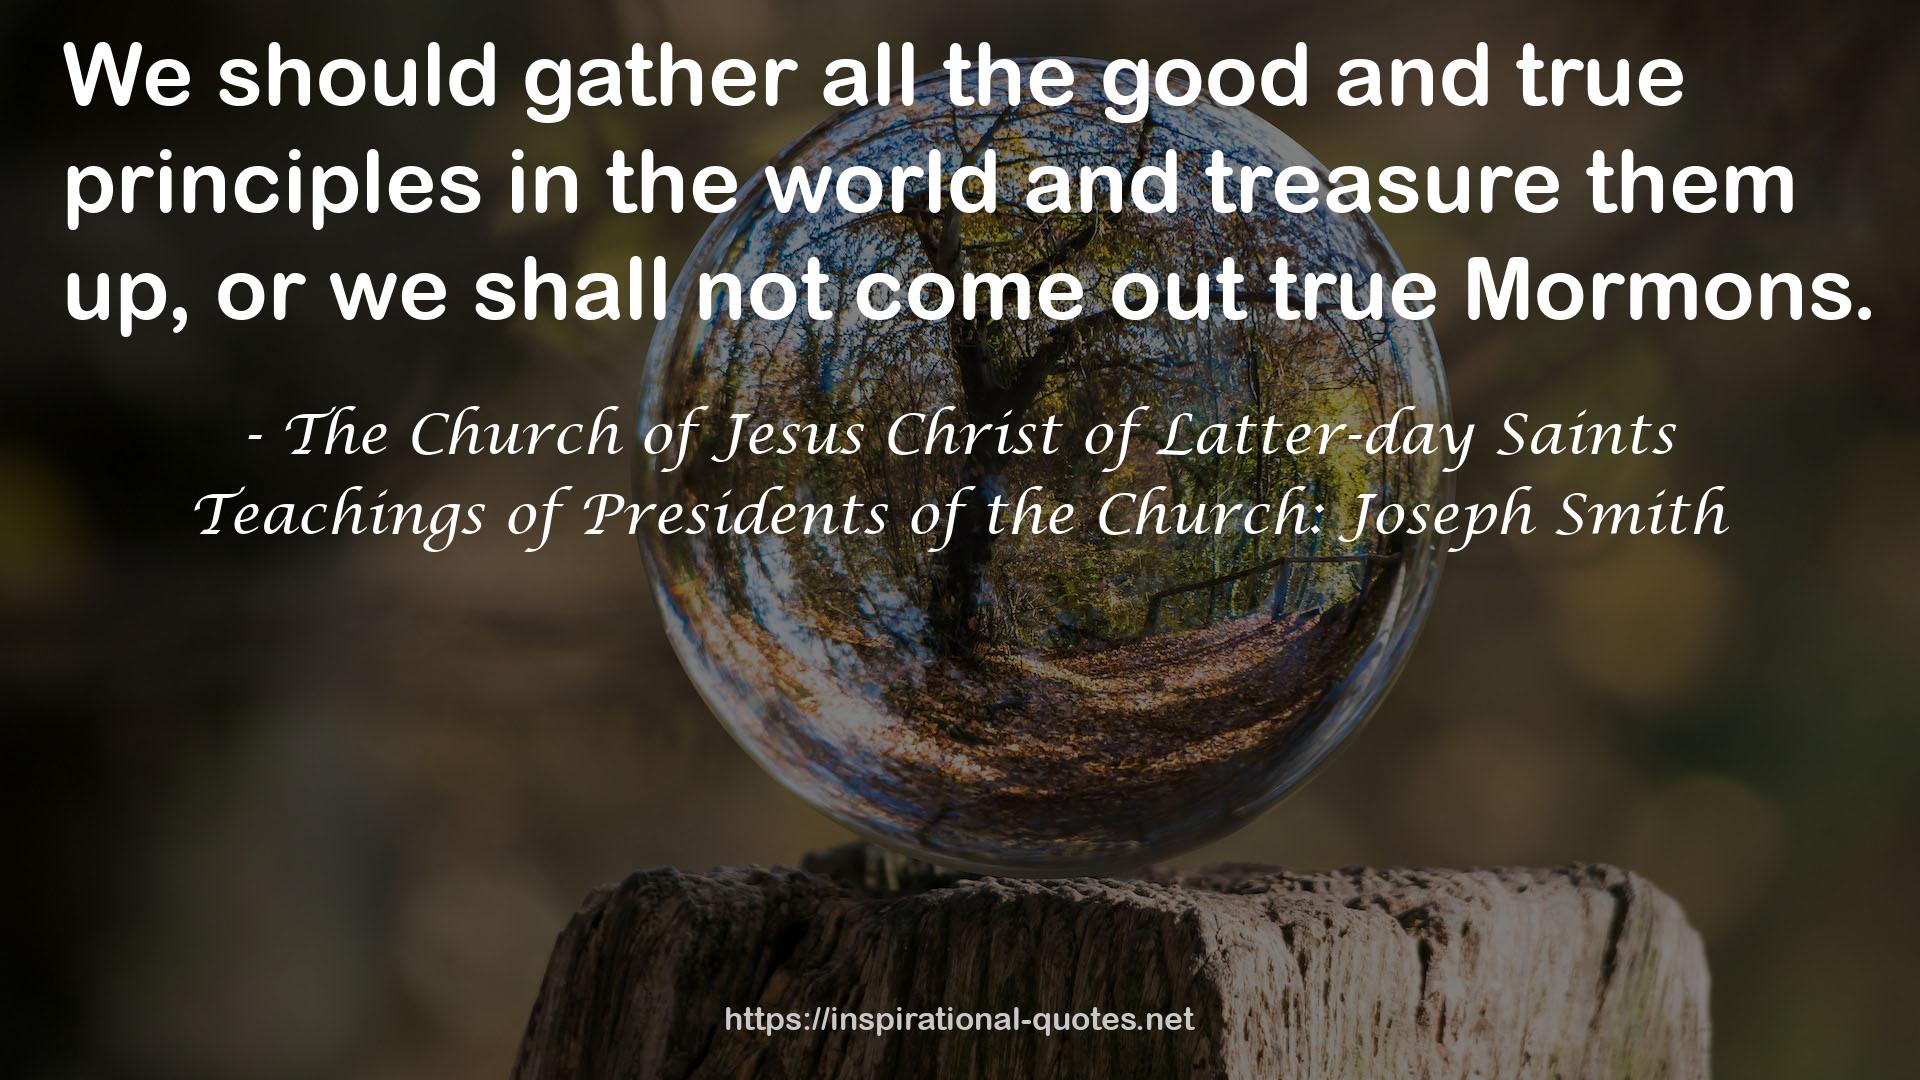 The Church of Jesus Christ of Latter-day Saints QUOTES